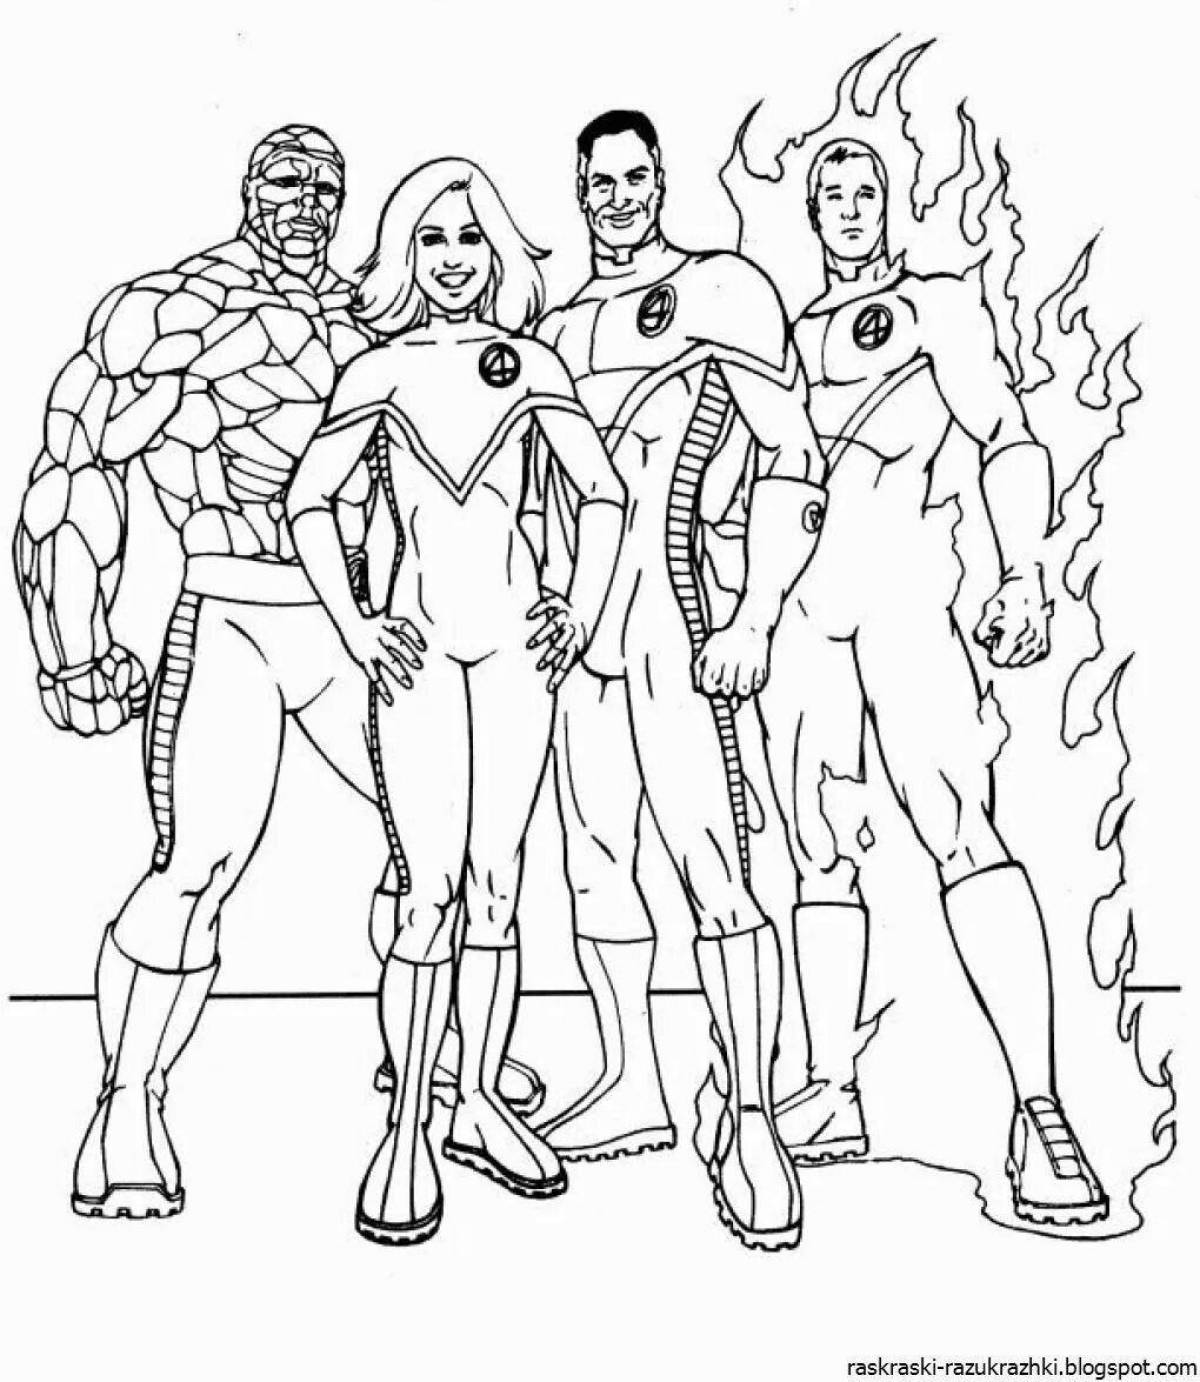 Creative superhero coloring book for 4-5 year olds